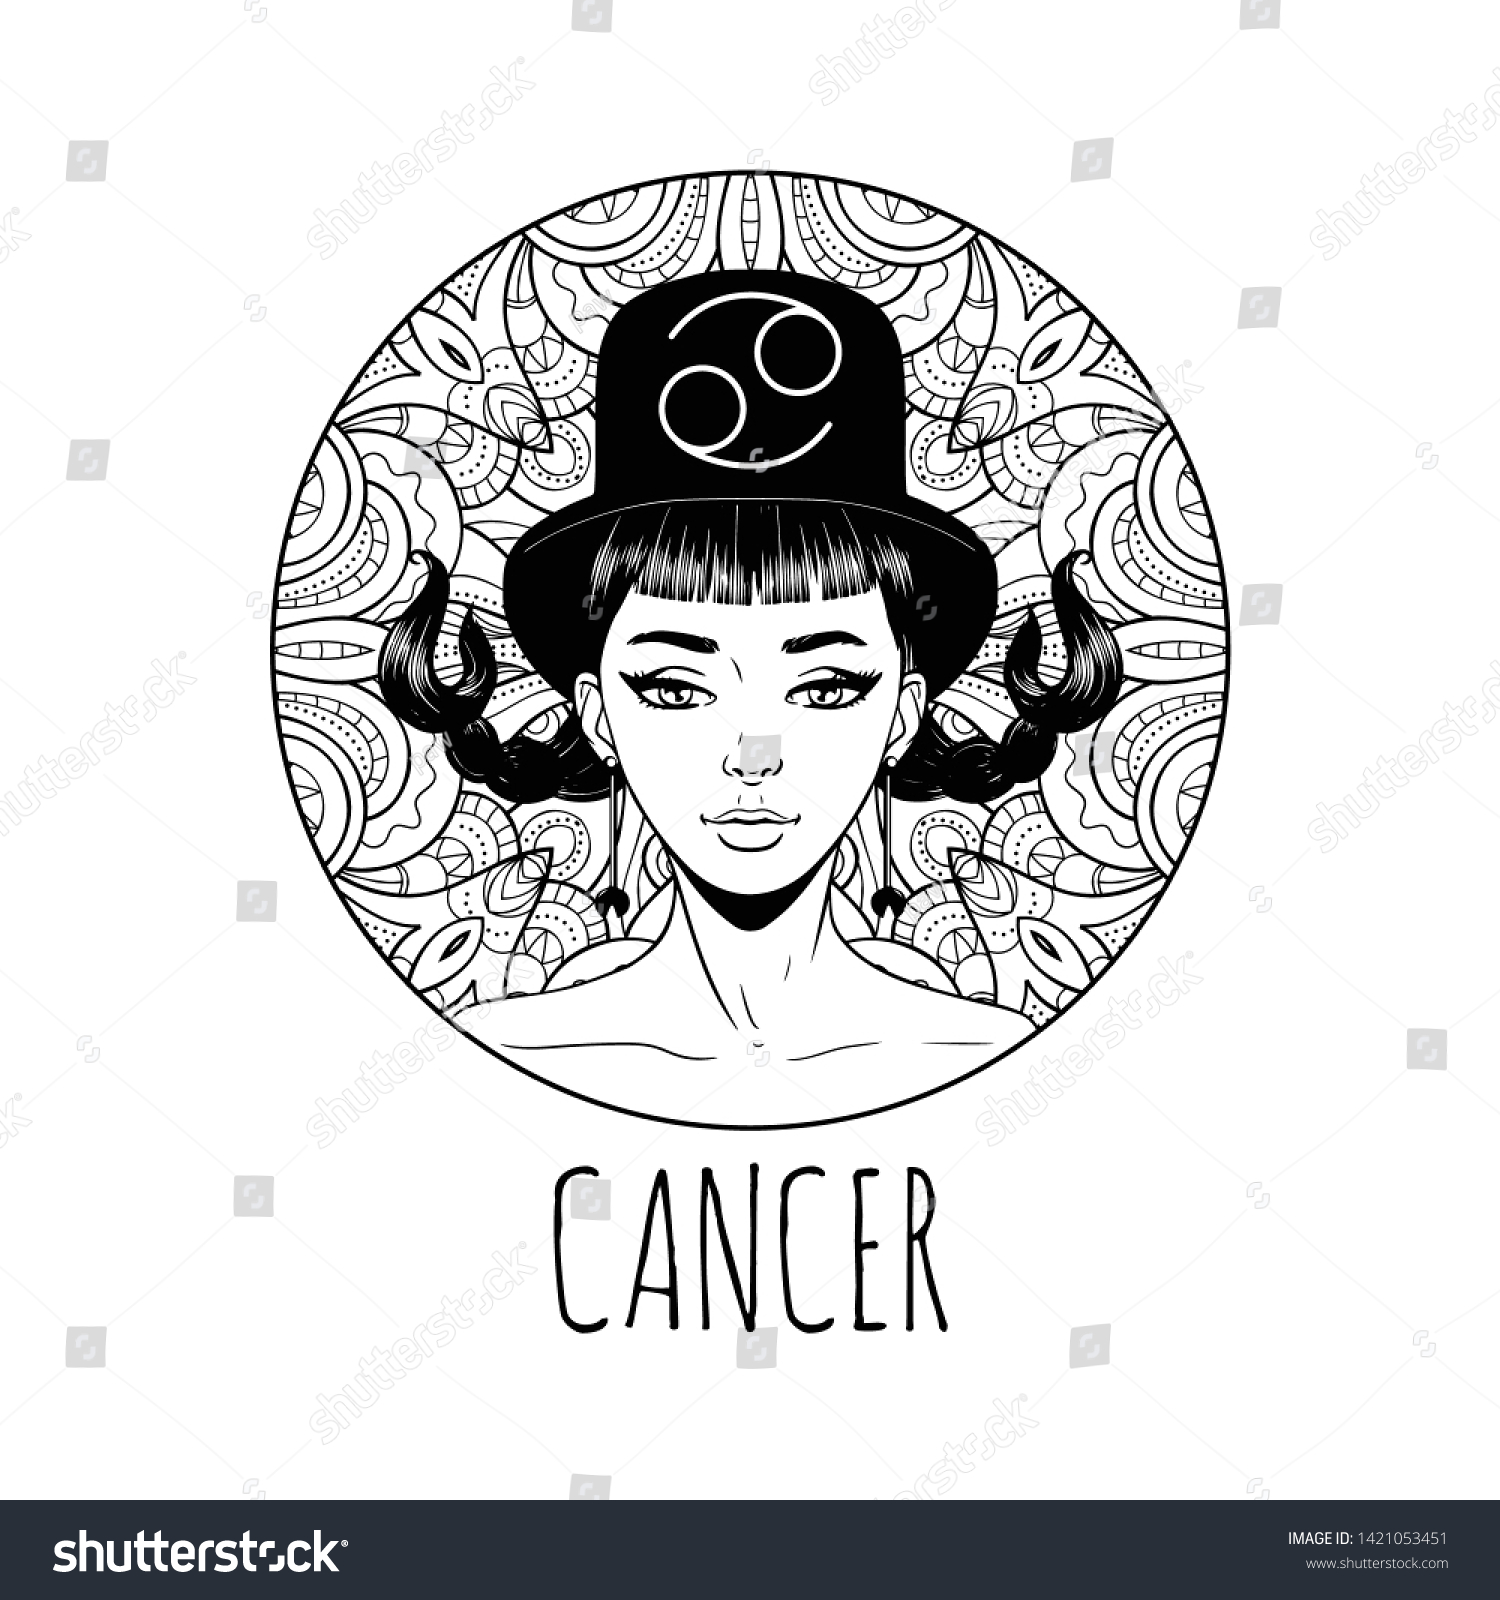 Cancer Zodiac Sign Artwork Adult Coloring Stock Vector Royalty ...